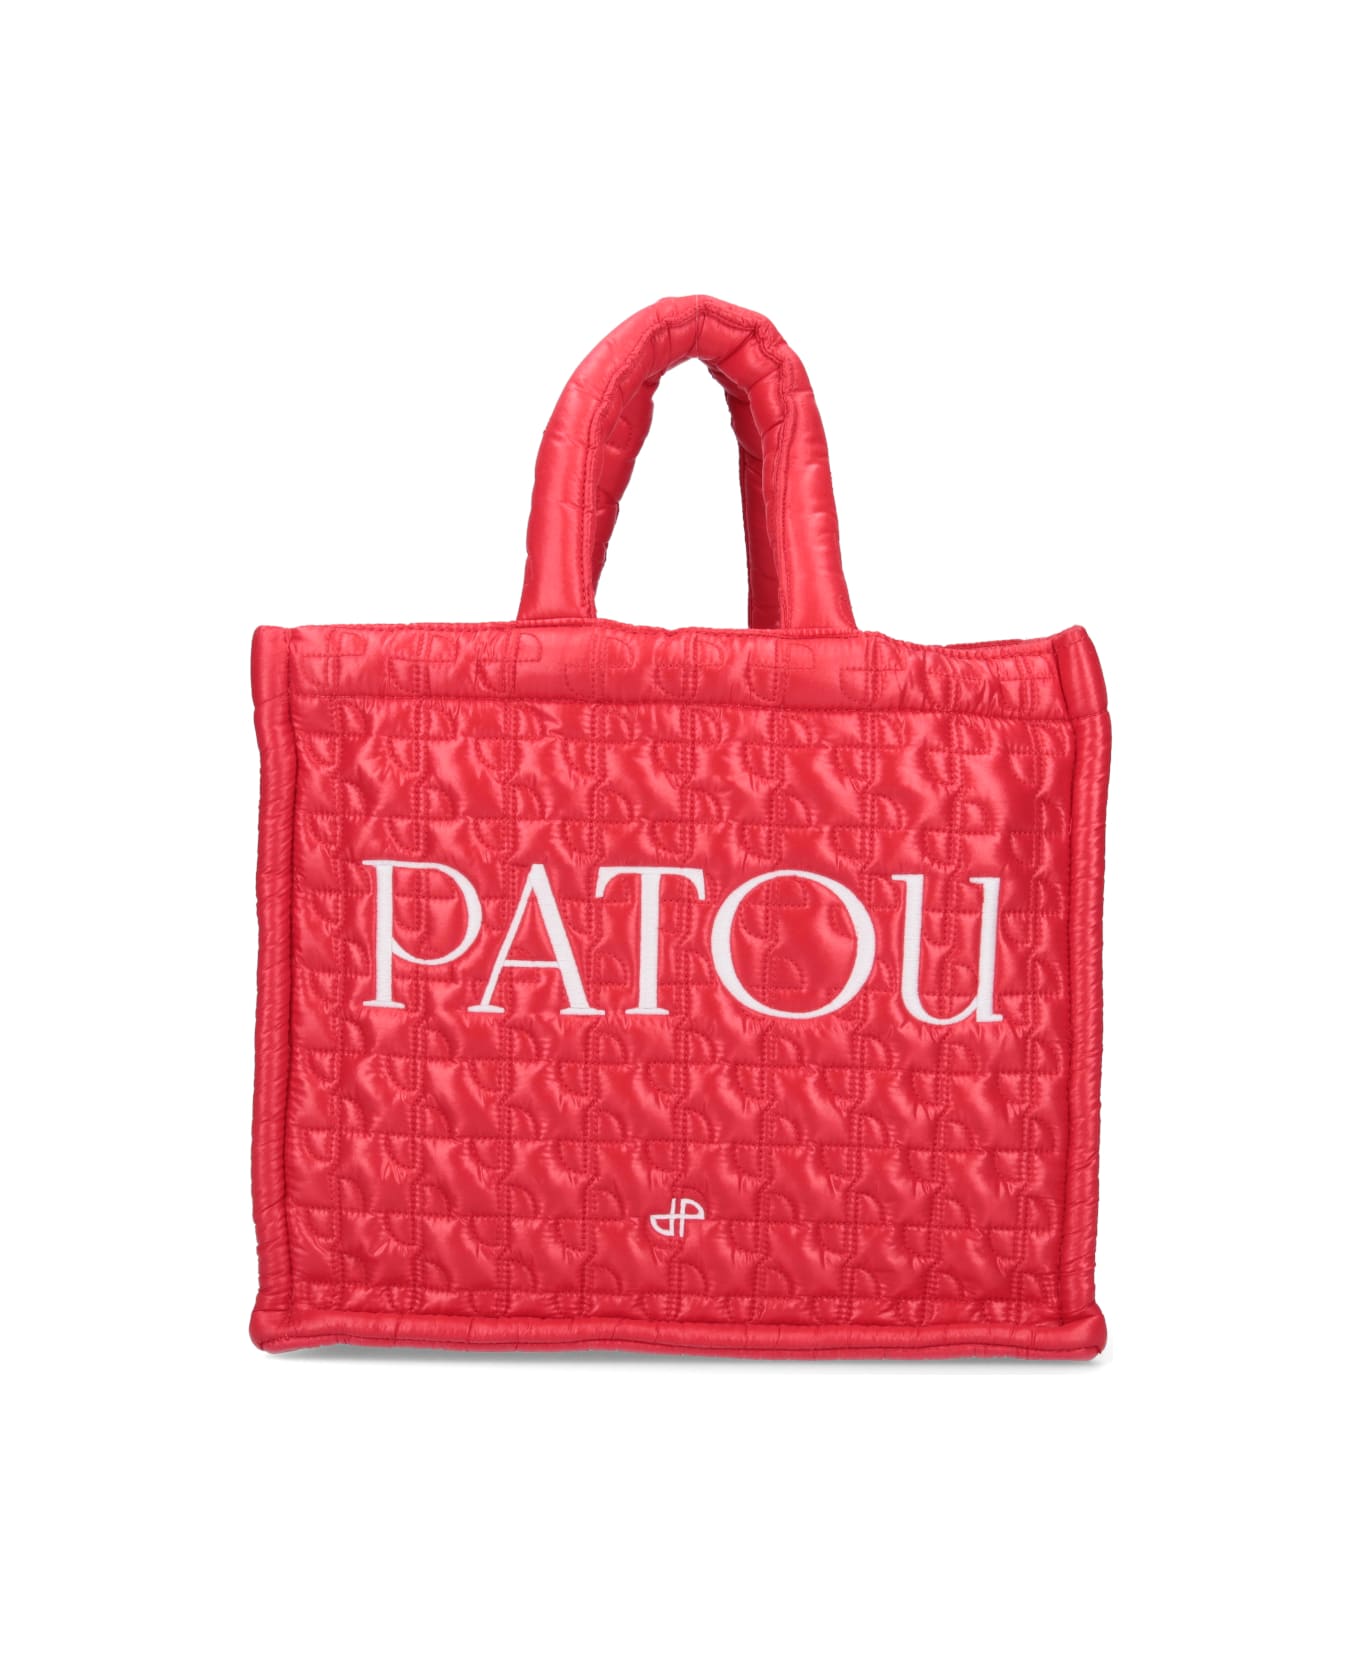 Patou Small Quilted Tote Bag - Red トートバッグ